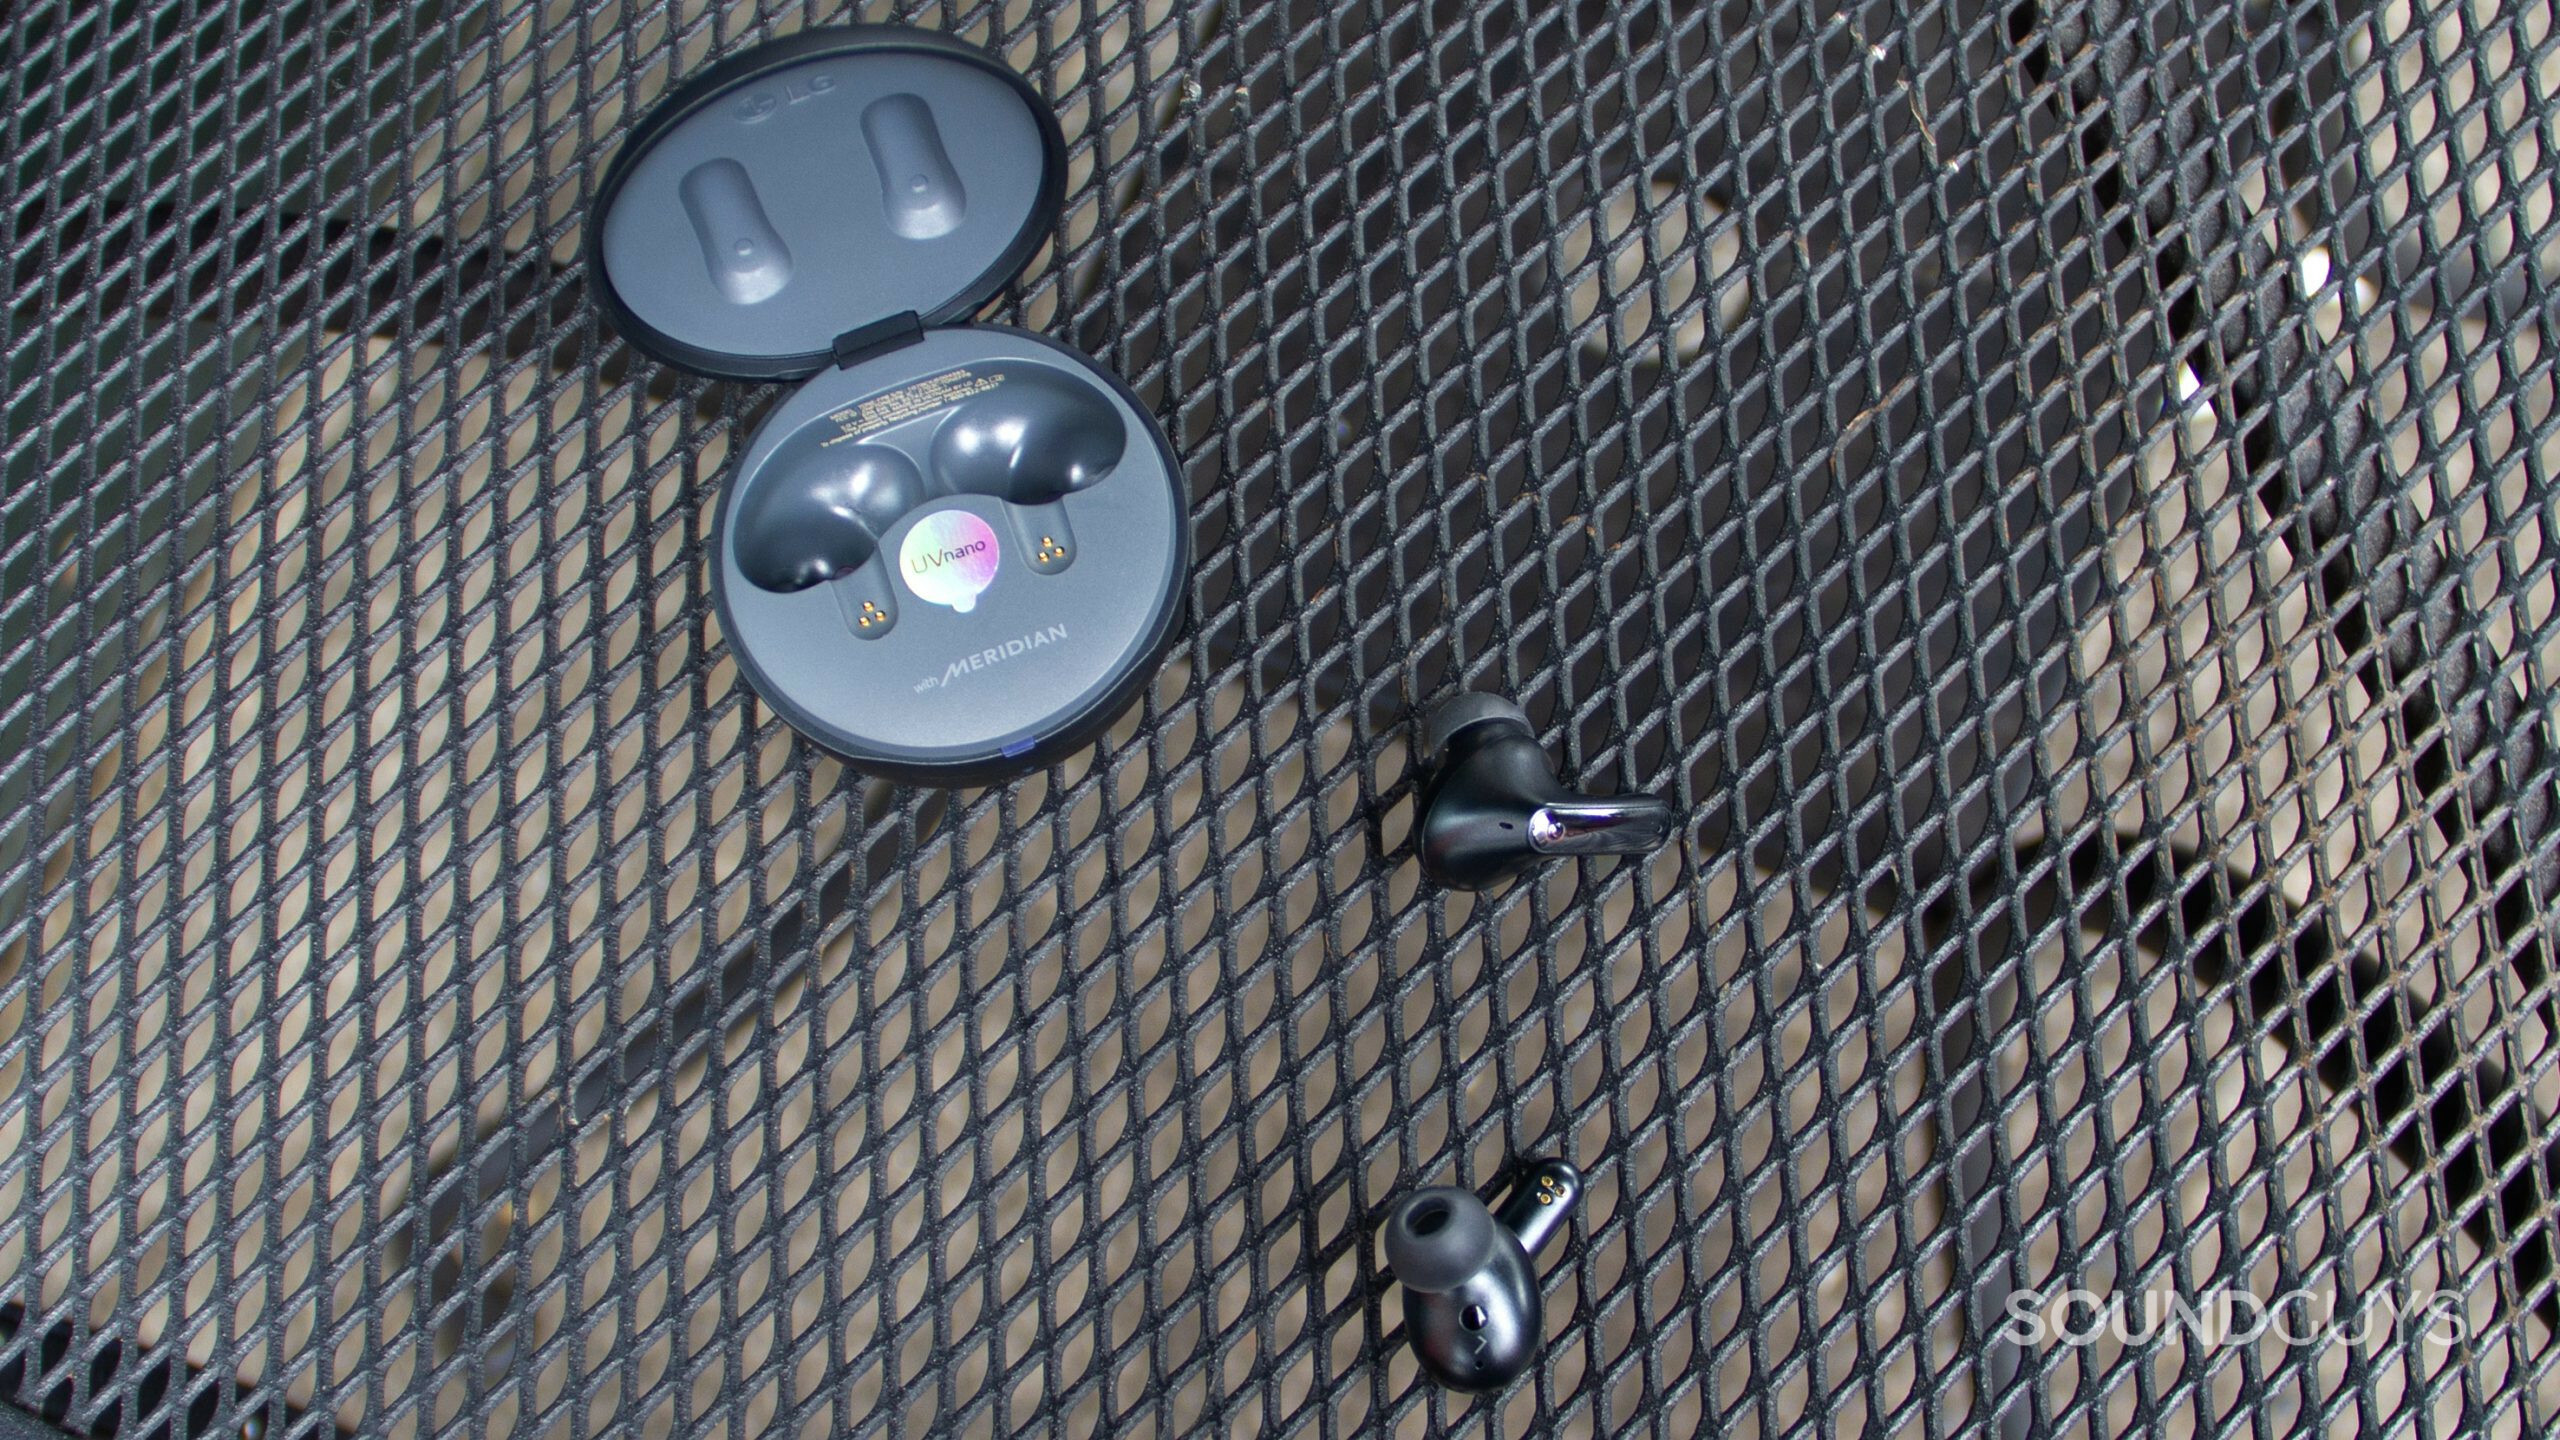 On a metal table the open case of the LG TONE Free FP8 with the earbuds out.